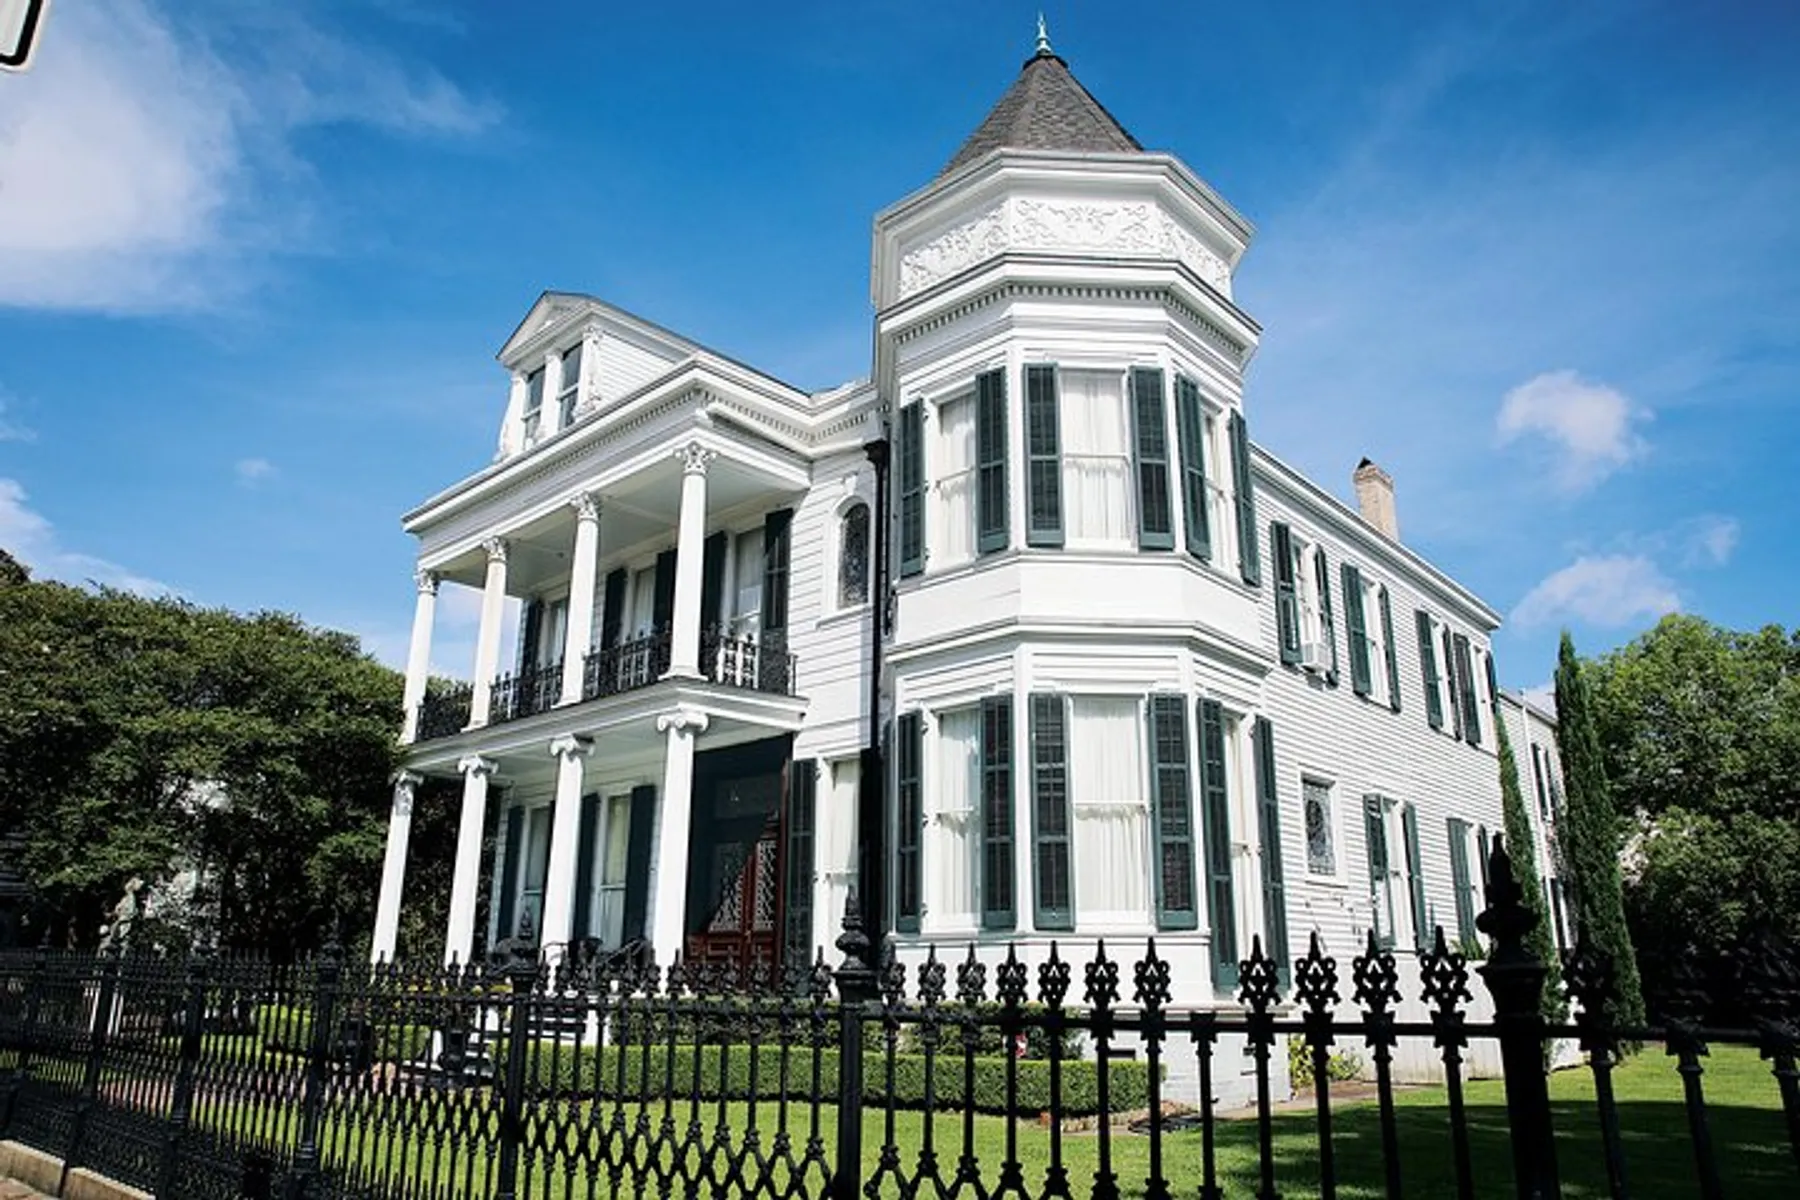 The image shows a grand white Victorian-style house with a prominent tower feature, expansive porches, black wrought-iron fencing, and neatly manicured lawn under a clear blue sky.